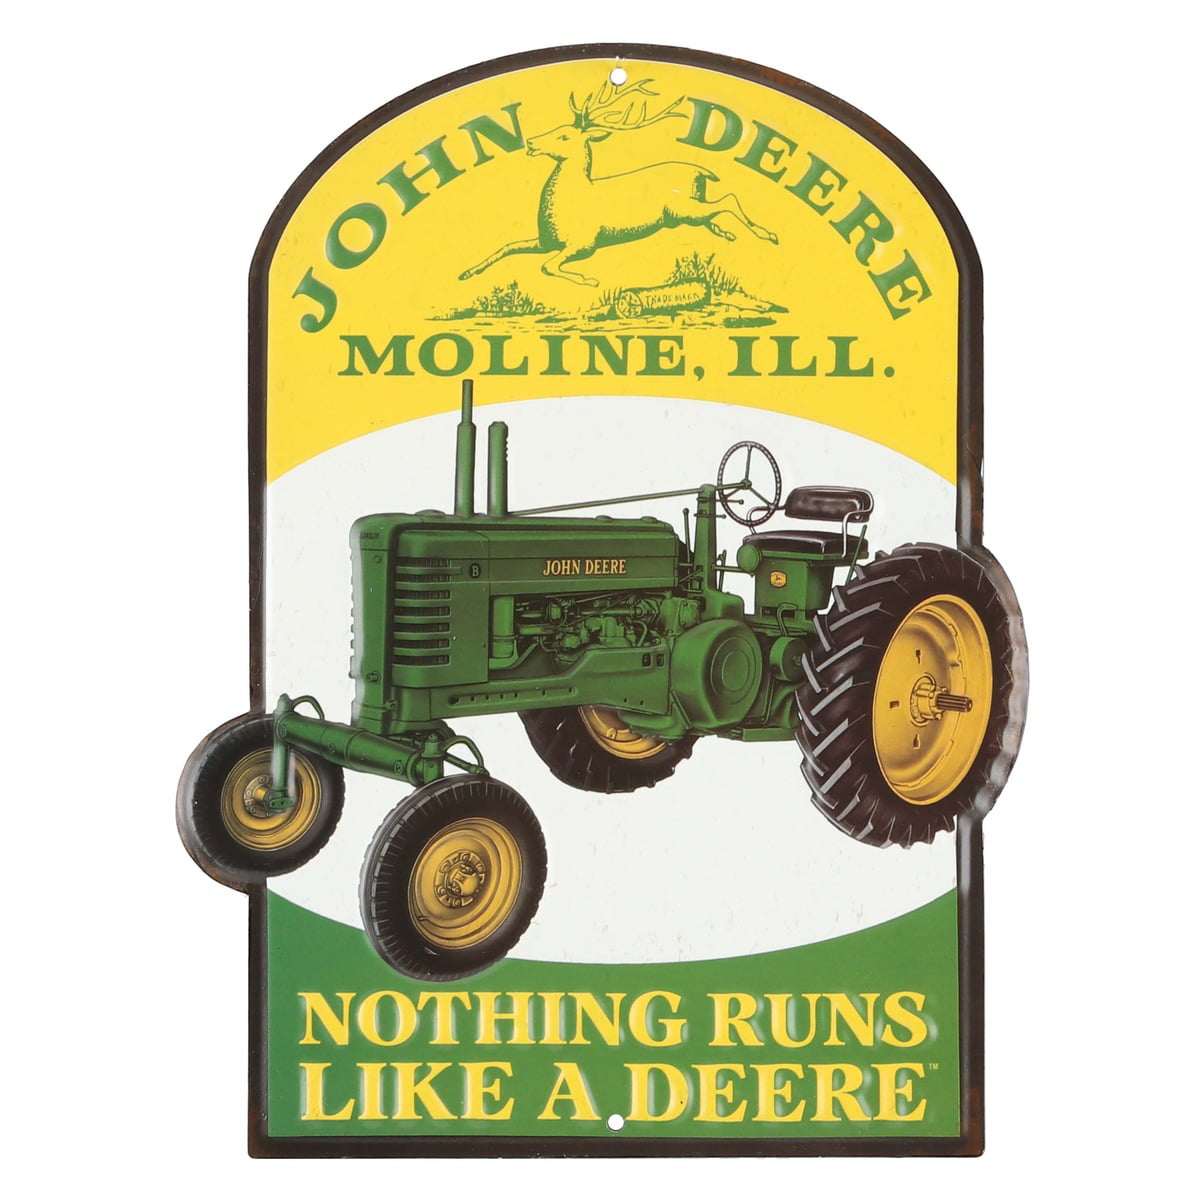 JOHN DEERE 16x20 Farm Agriculture Tractor Nothing Runs Like a Deere Poster 